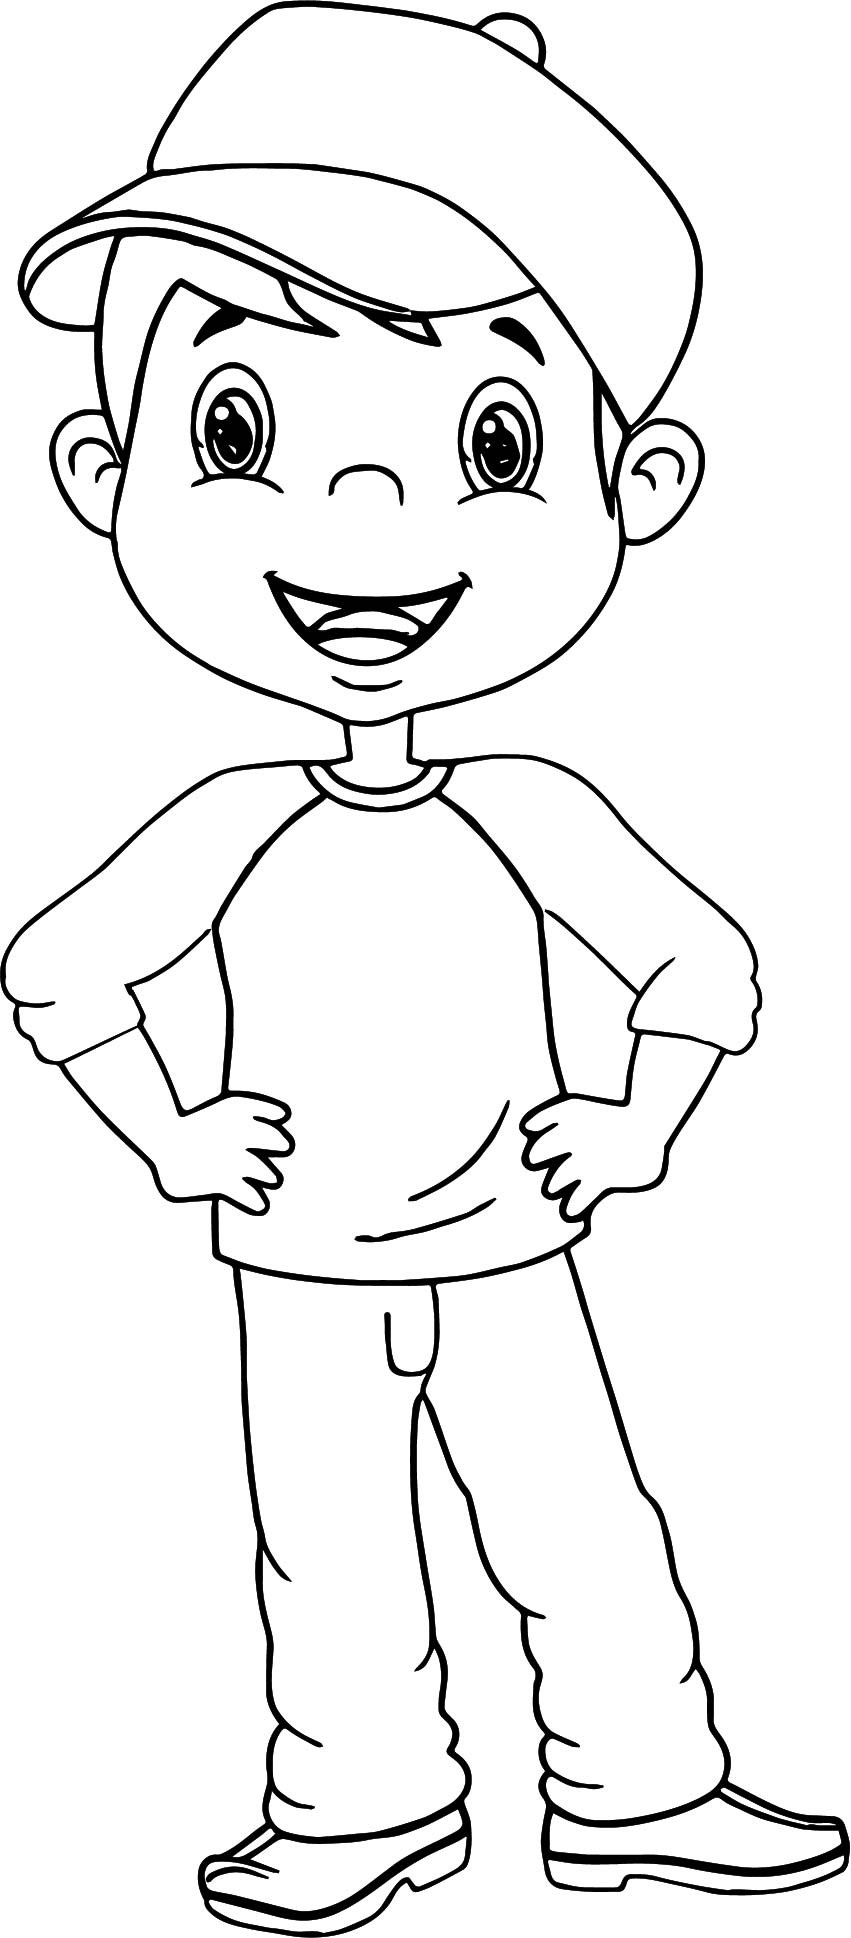 Boy Coloring Books
 Cartoon Boy With Hat Coloring Page